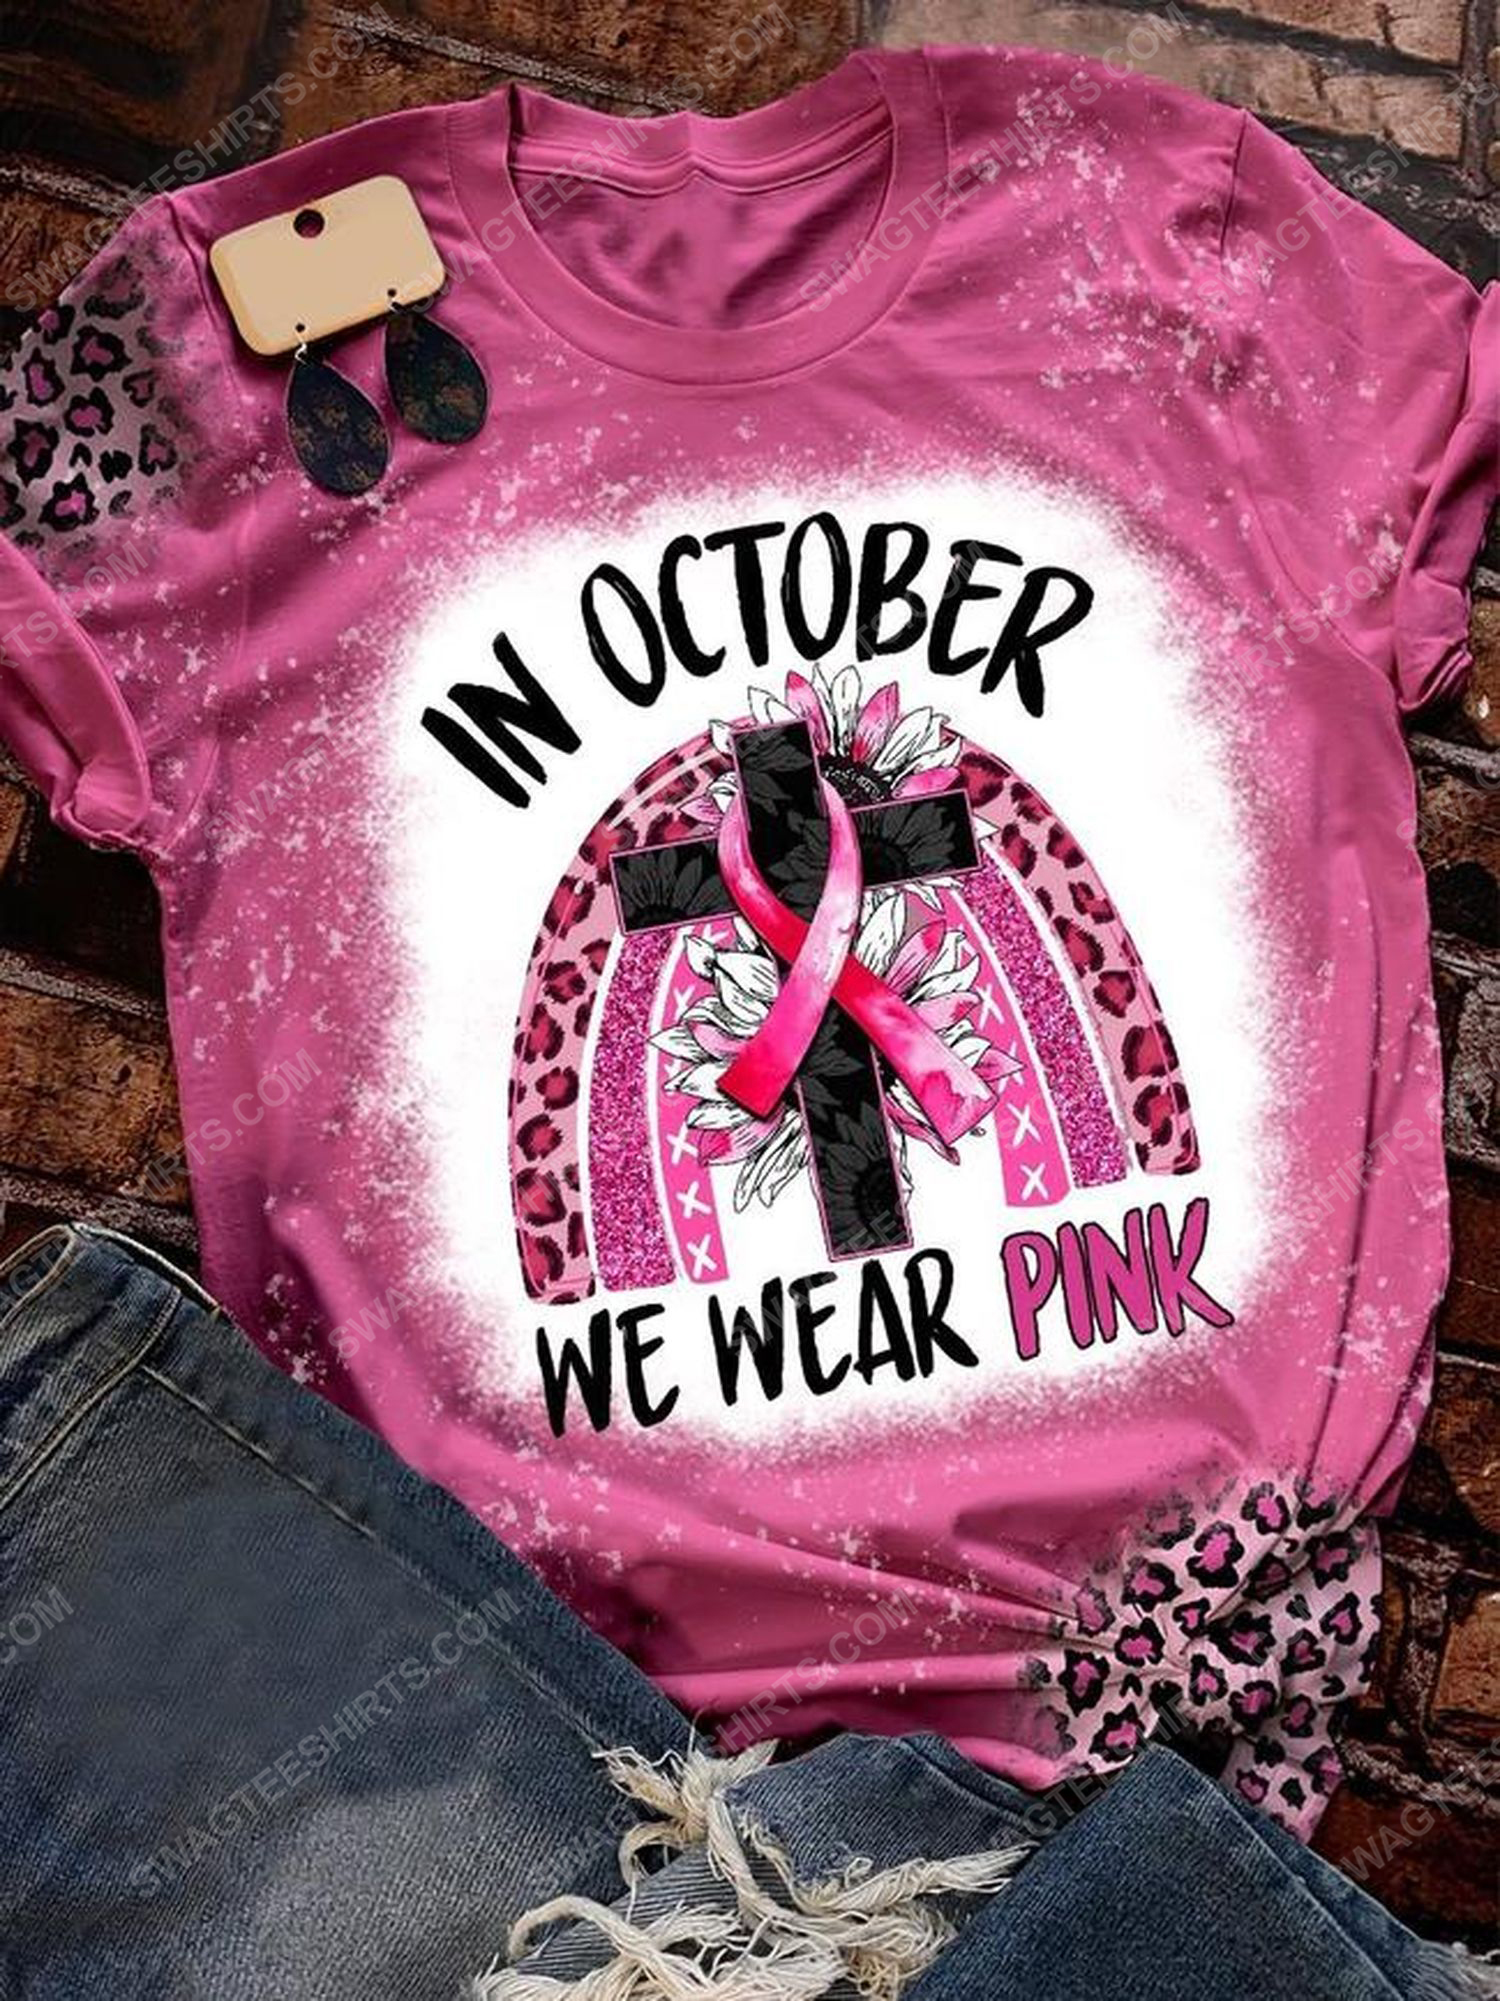 [special edition] Breast cancer awareness in october we wear pink leopard shirt – maria (cancer)